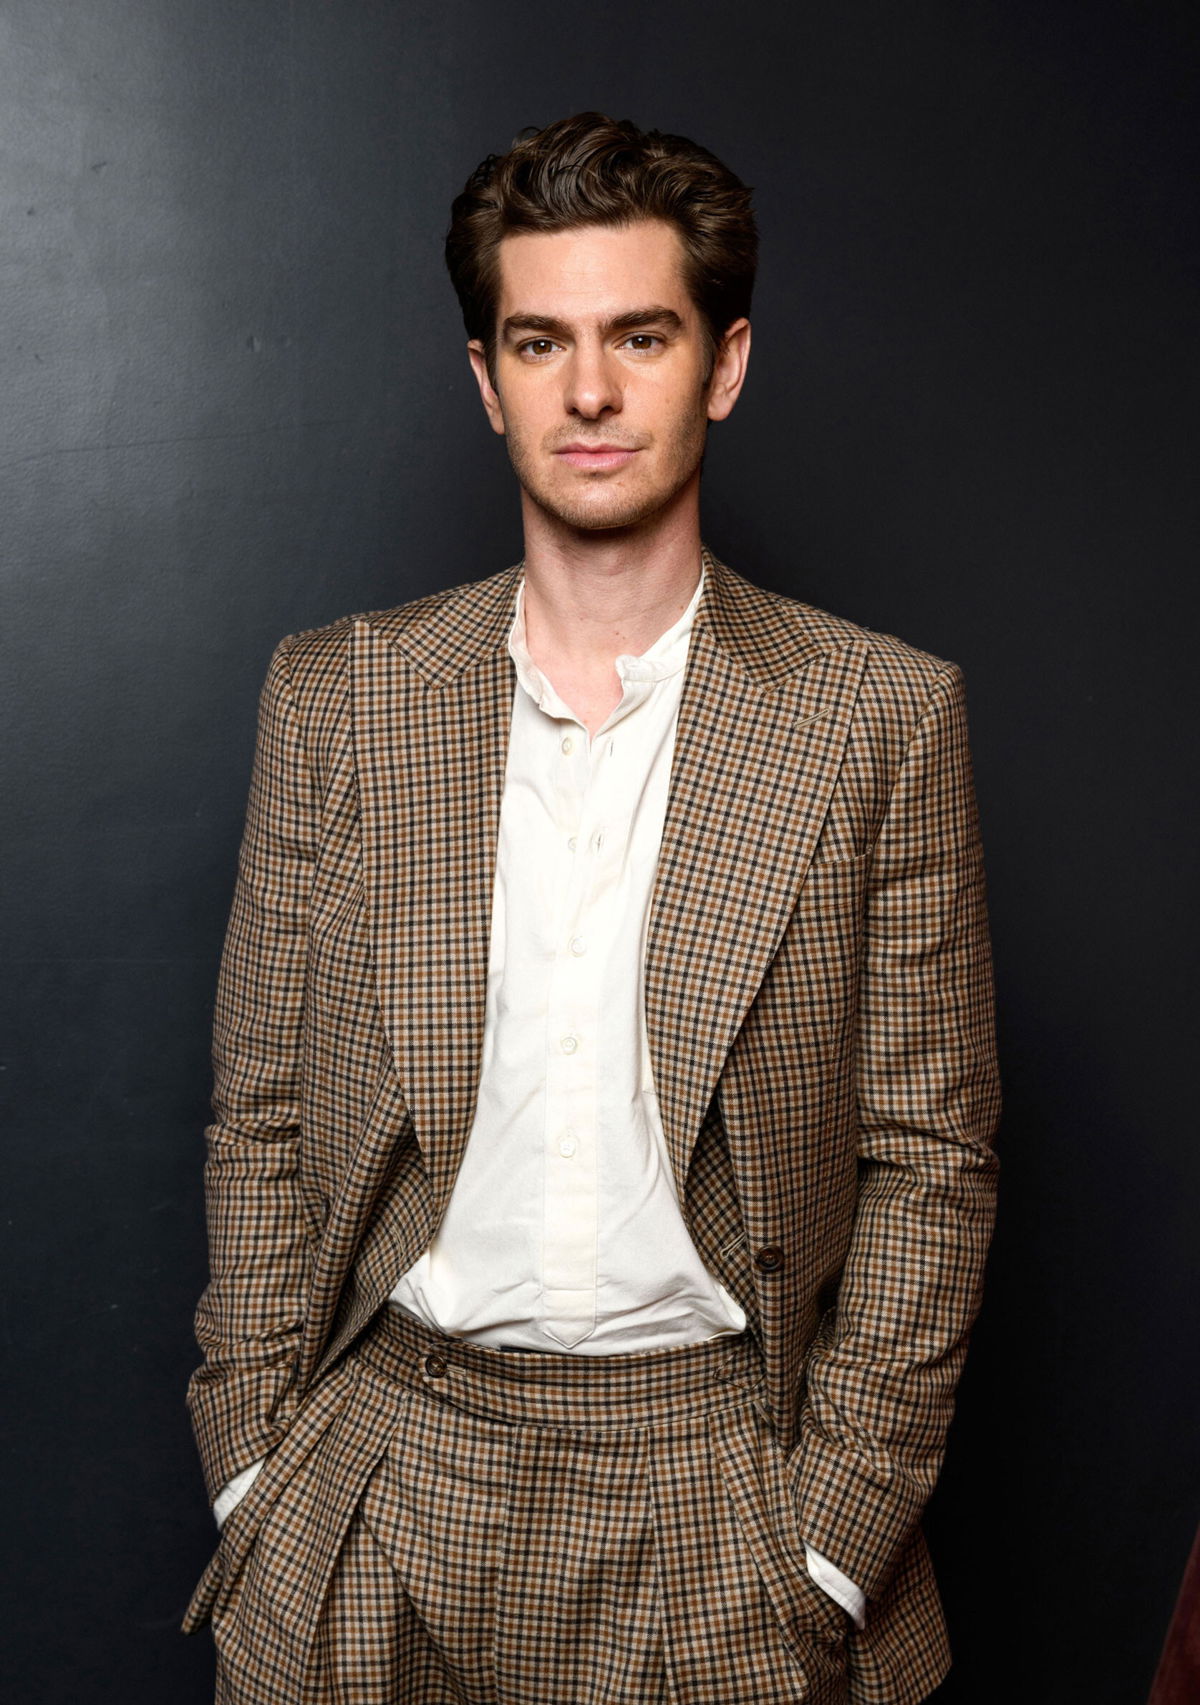 <i>Amanda Edwards/Getty Images</i><br/>Andrew Garfield repeatedly dismissed rumors he would appear in the latest 'Spider-Man' movie.